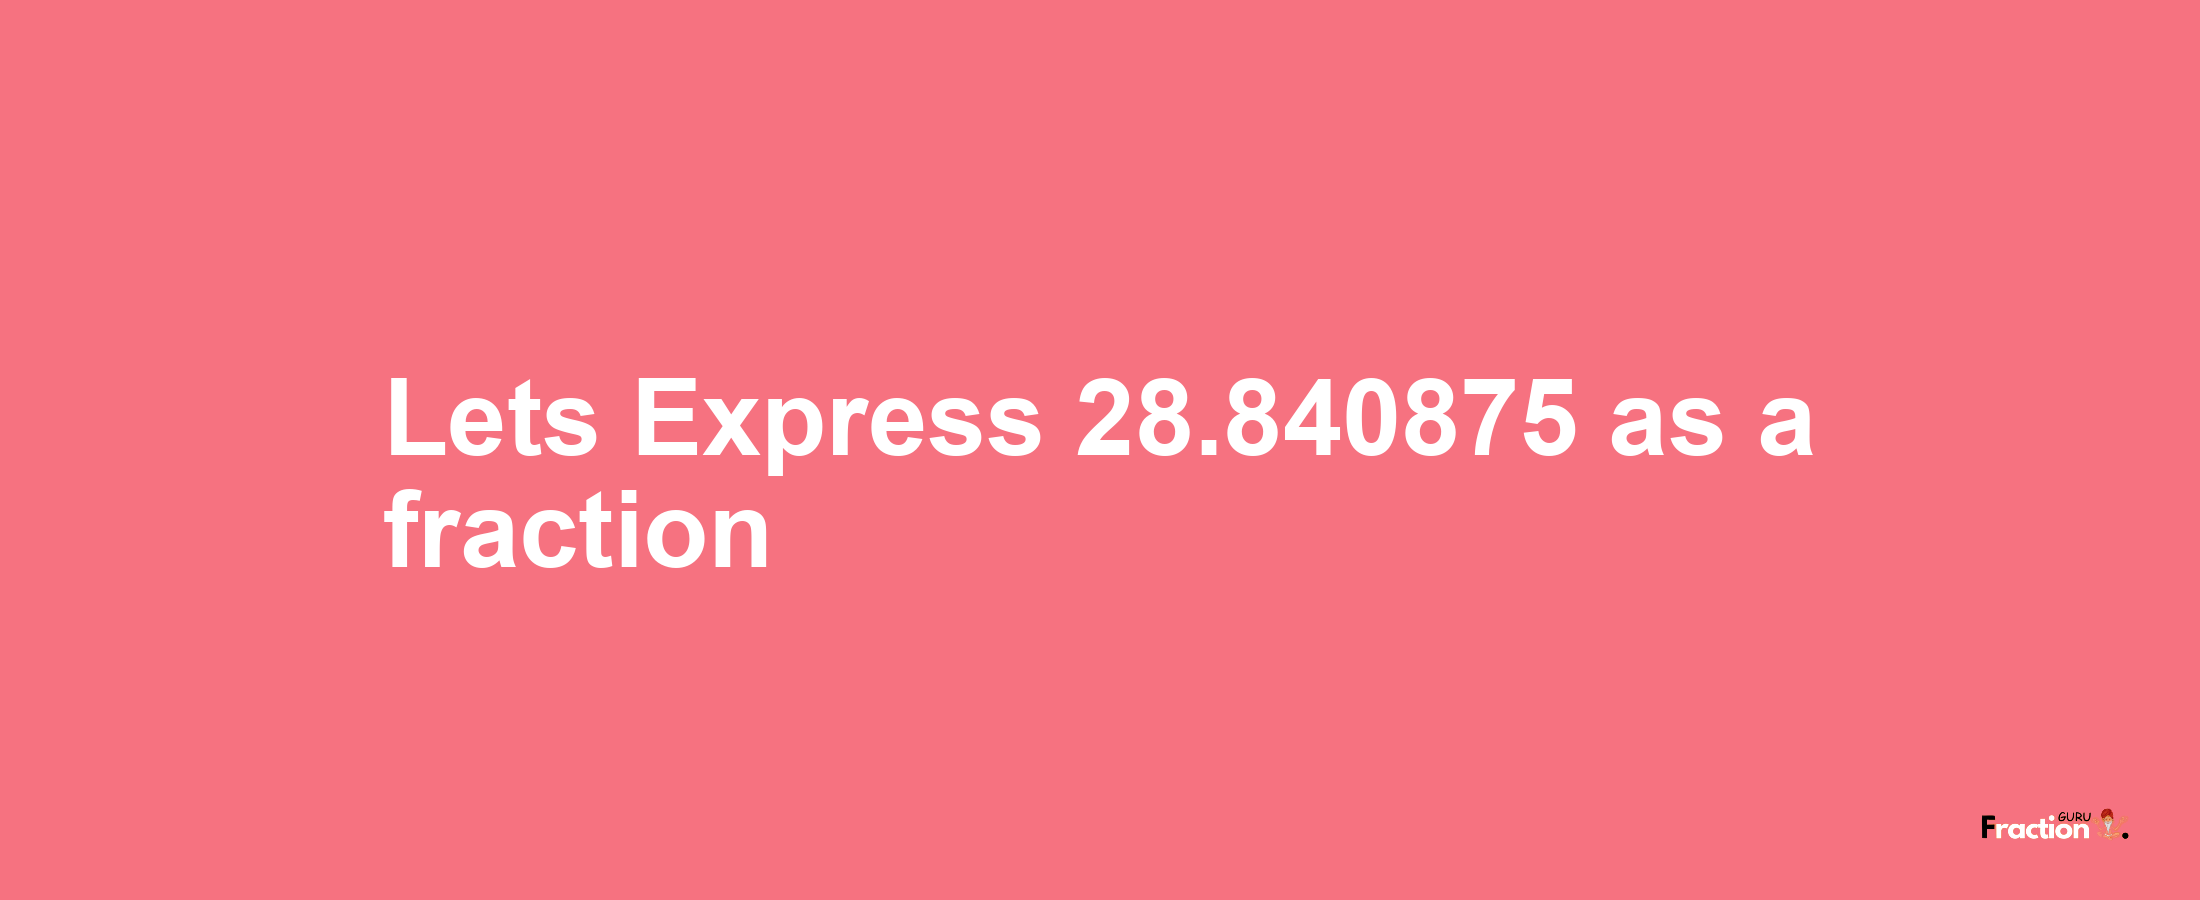 Lets Express 28.840875 as afraction